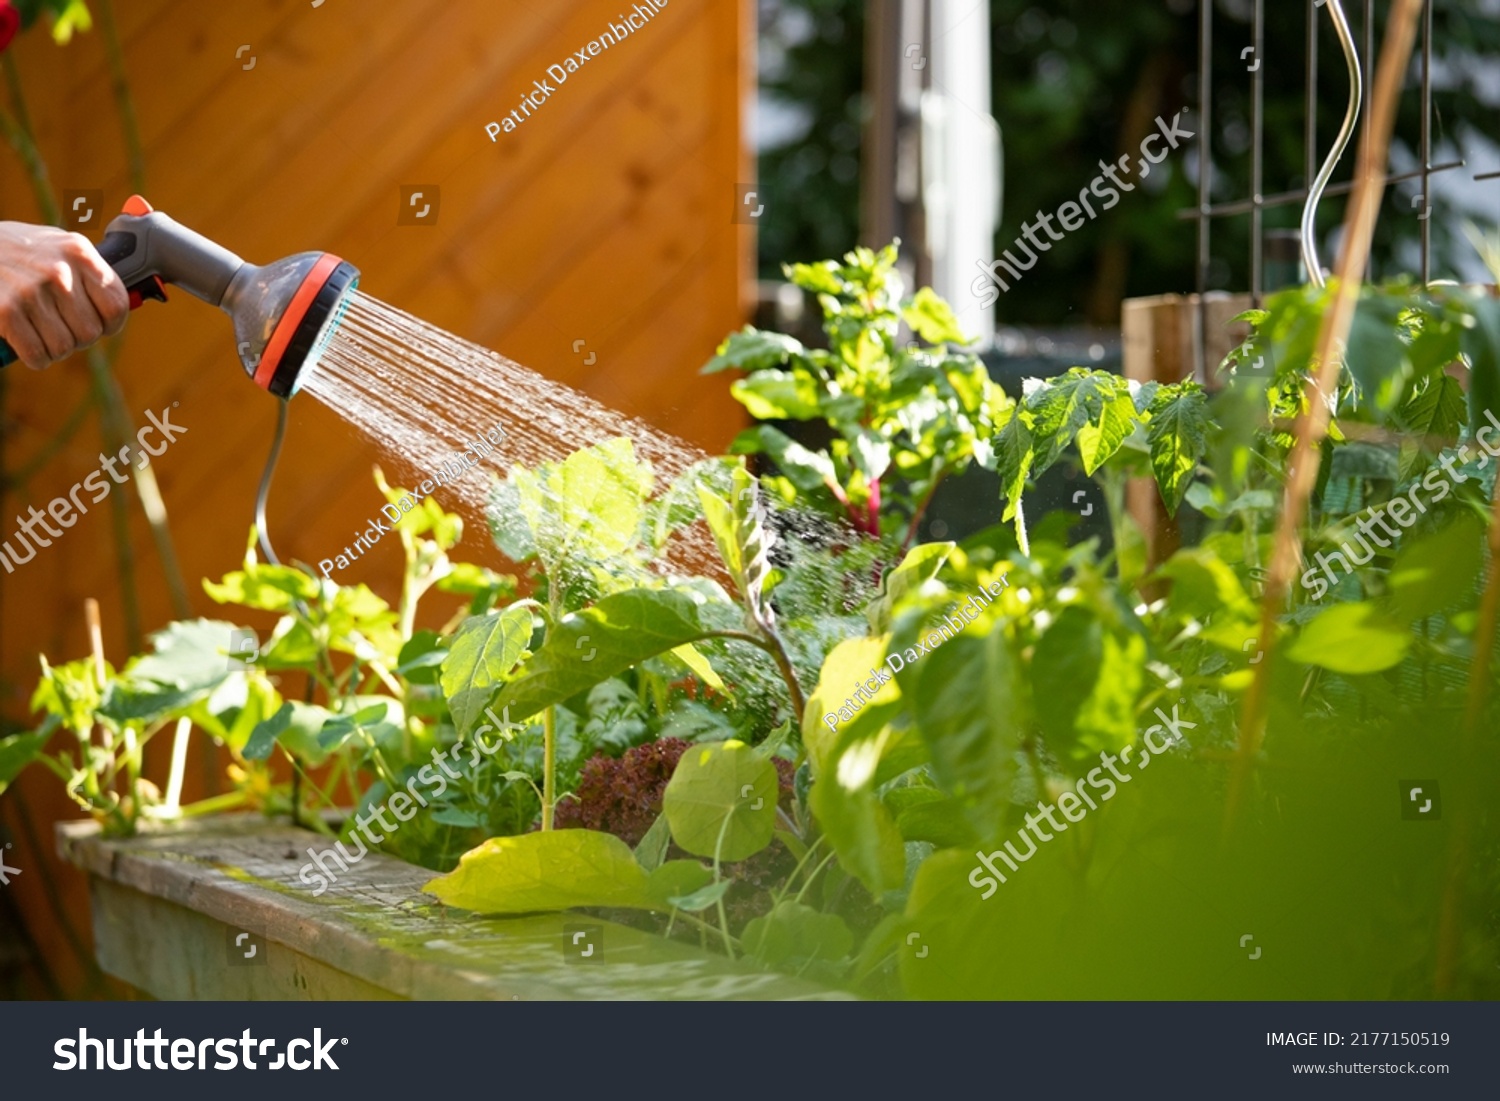 Urban gardening: Watering fresh vegetables and herbs on fruitful soil in the own garden, raised bed. #2177150519